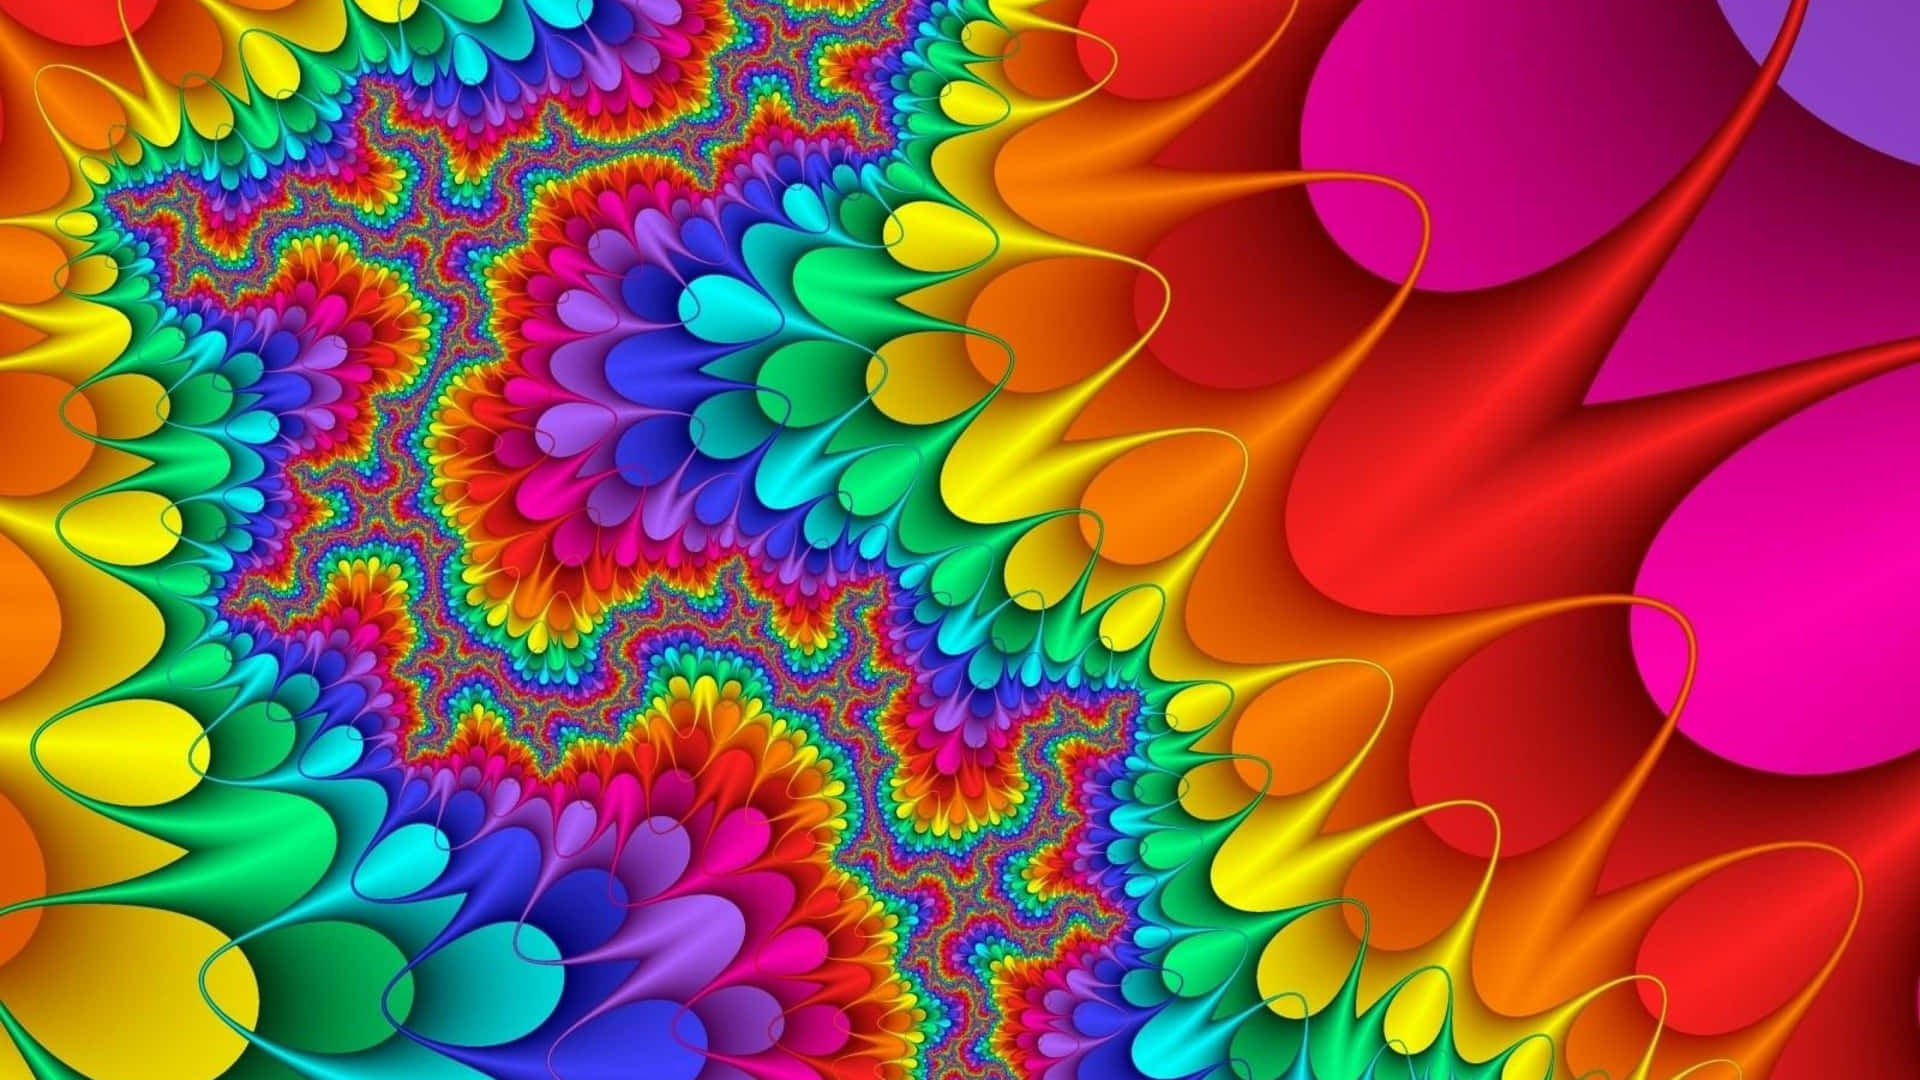 A Colorful Fractal Design With Colorful Flowers